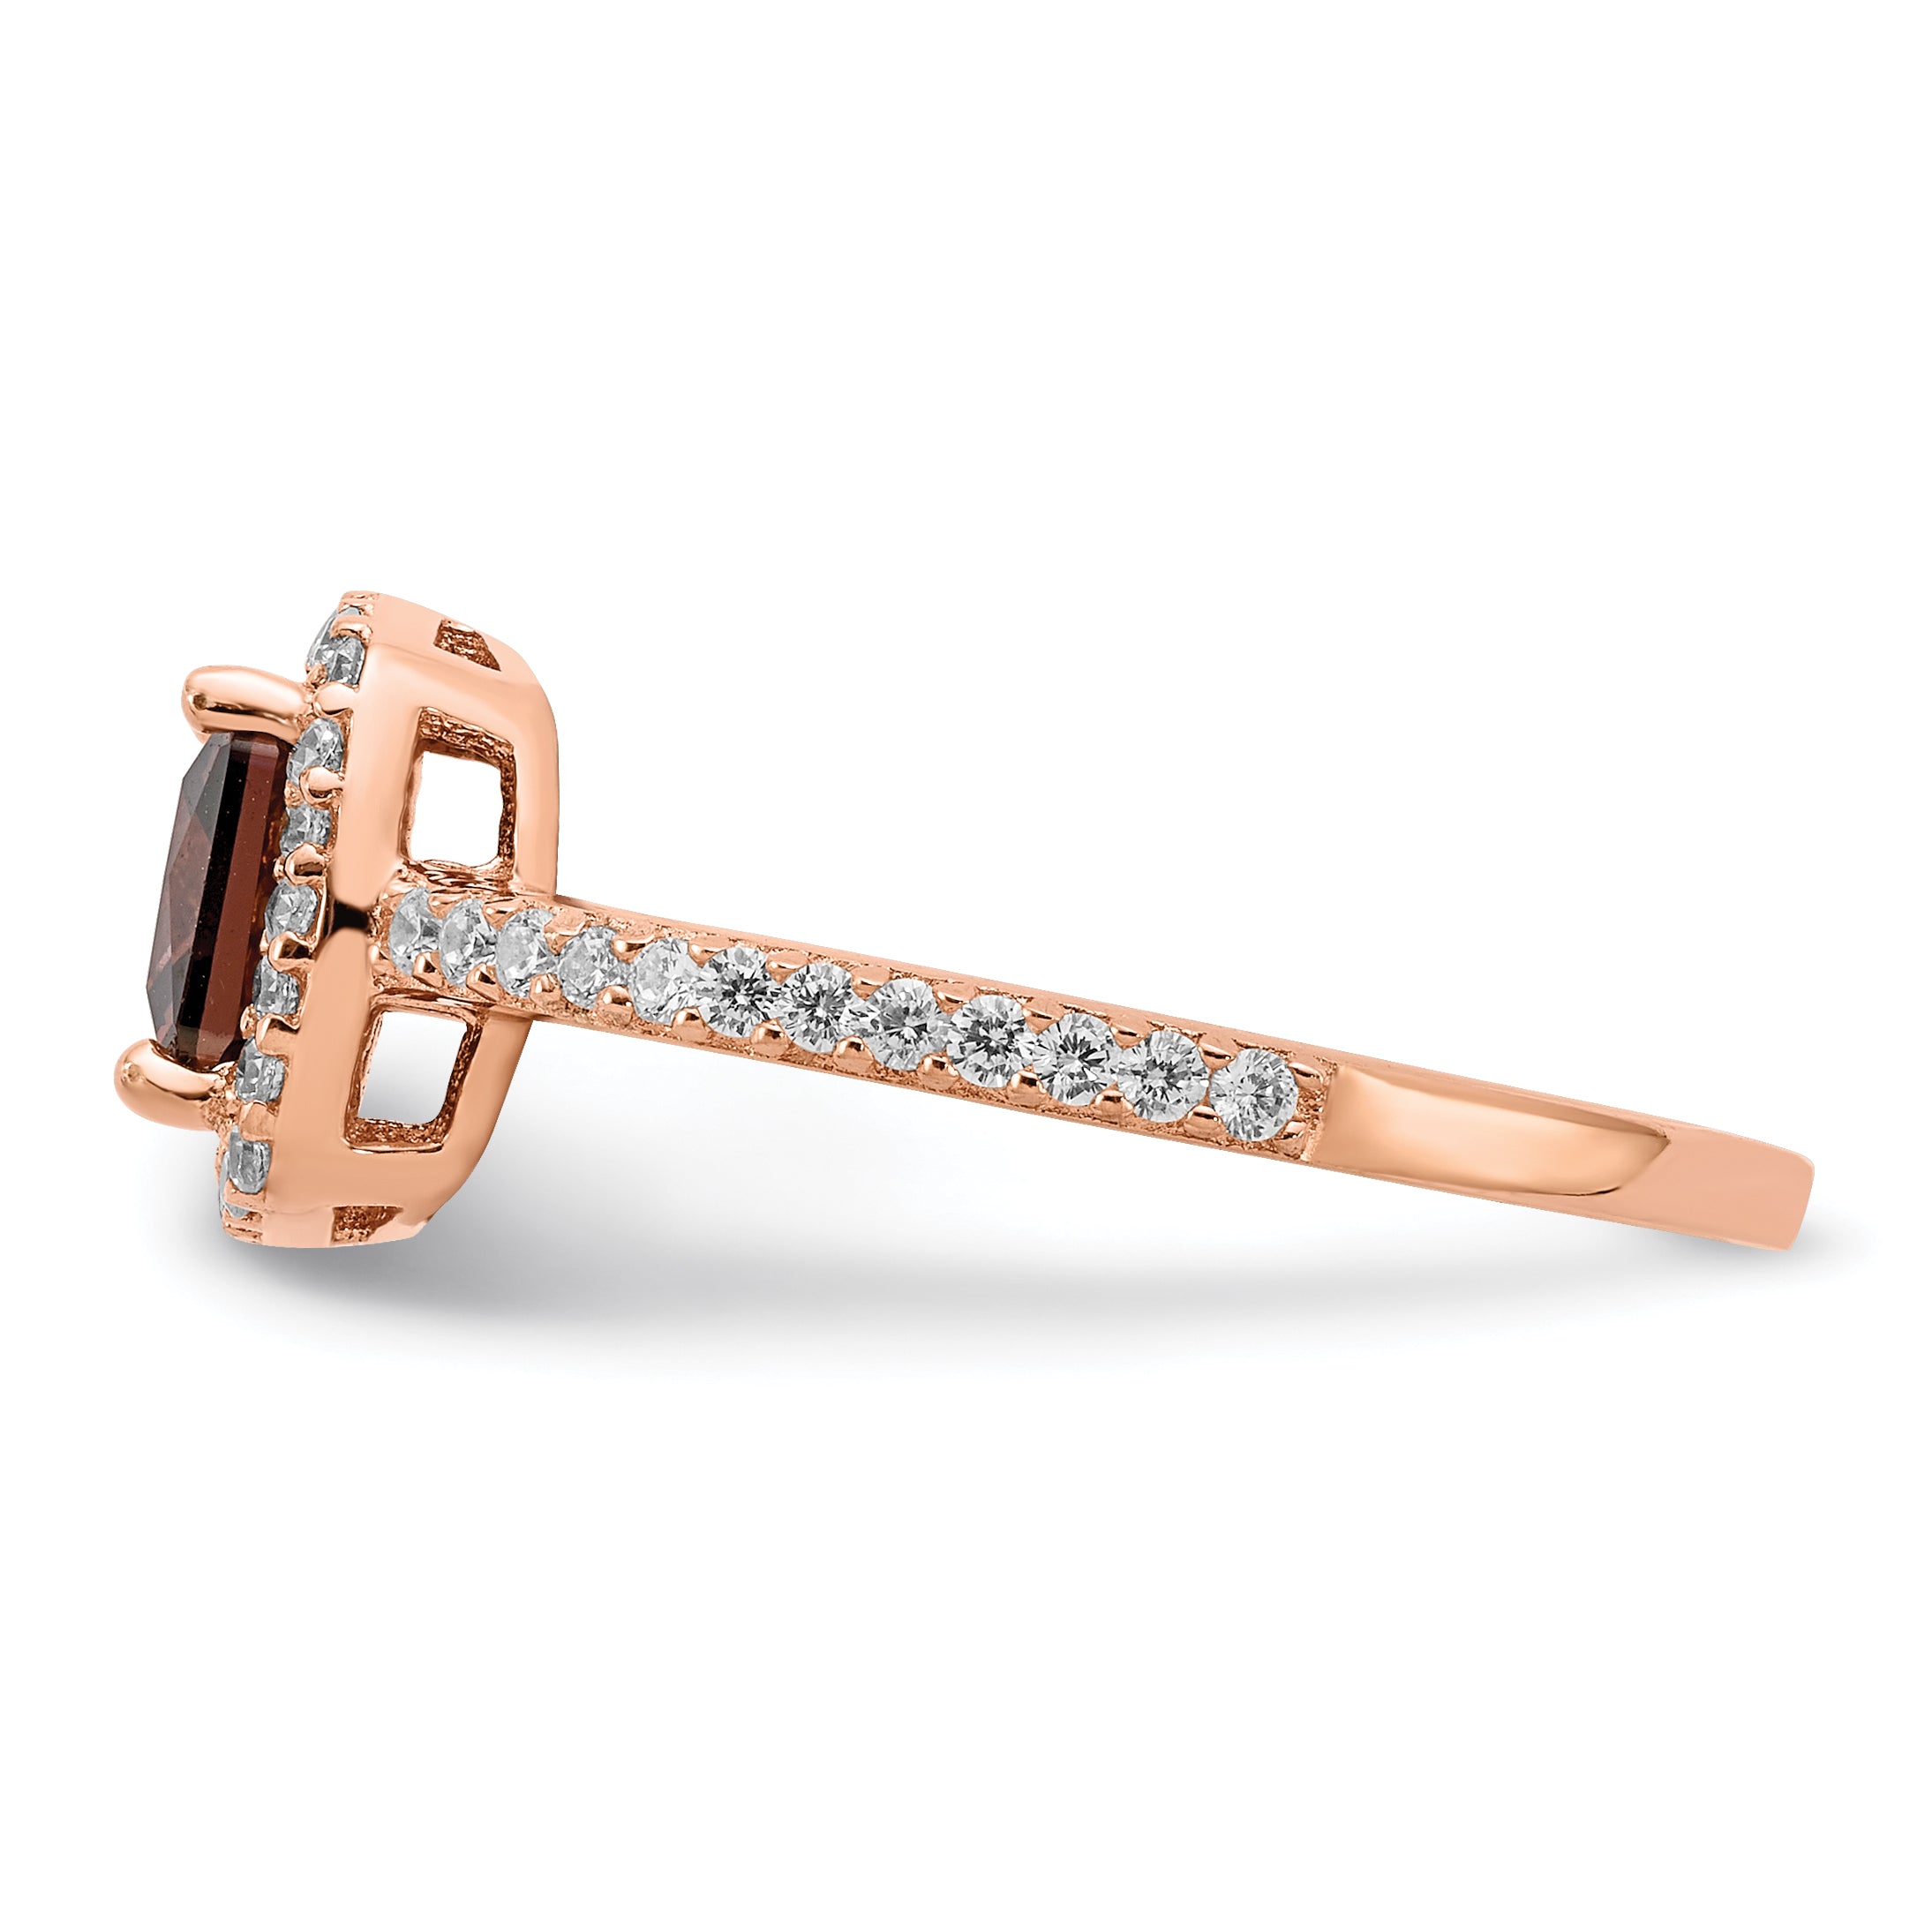 Cheryl M Sterling Silver Rose Gold-plated Cocoa Cushion-cut and White Brilliant-cut CZ Halo Ring